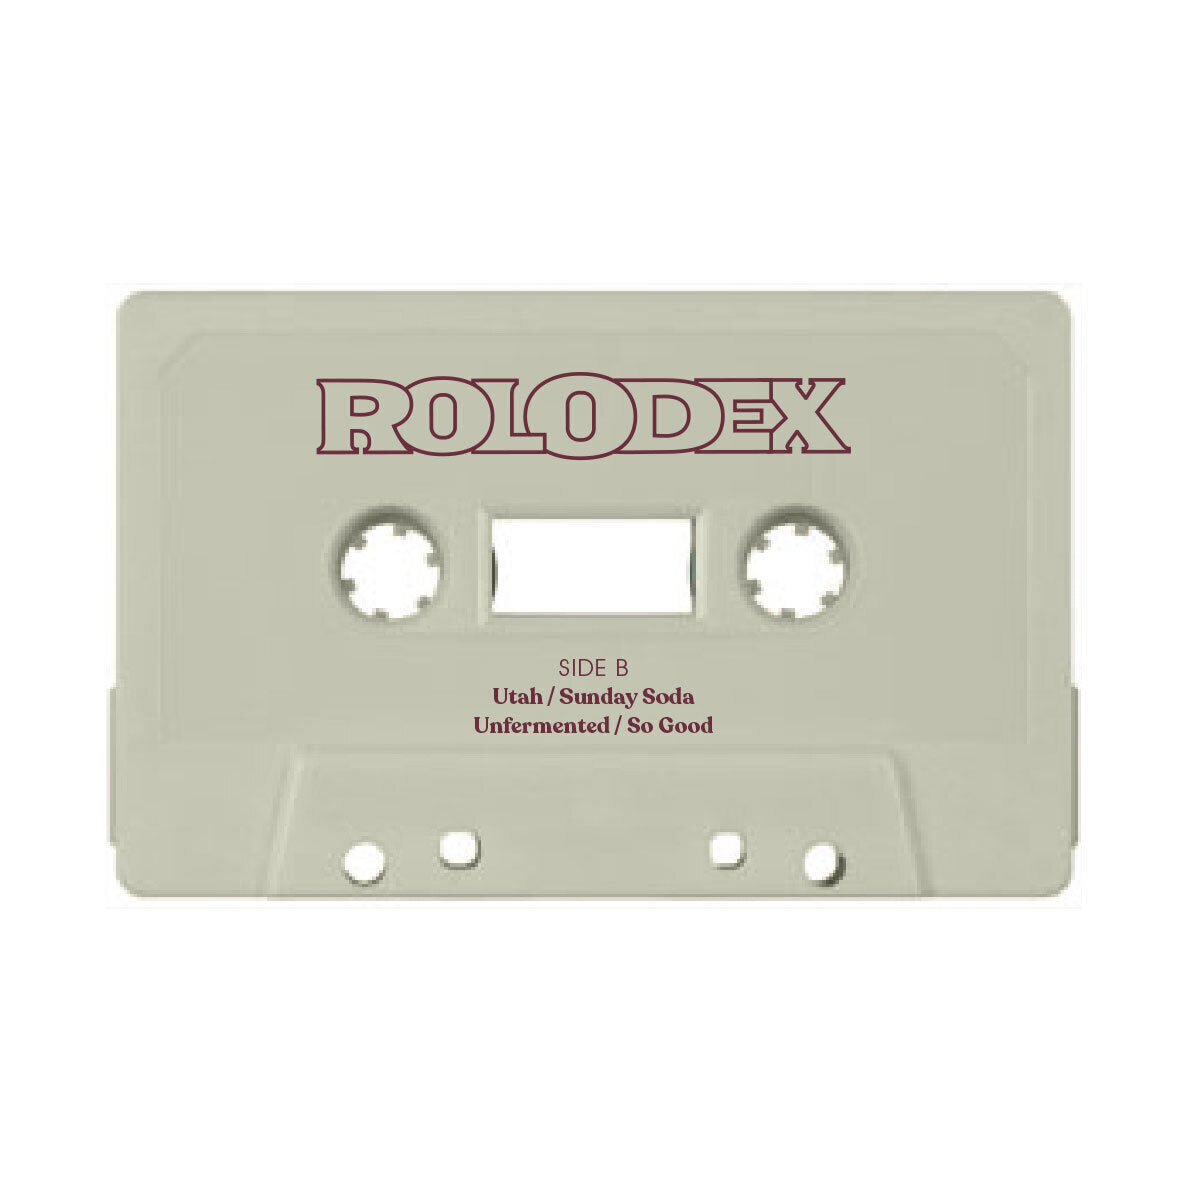 French Cassettes - Rolodex